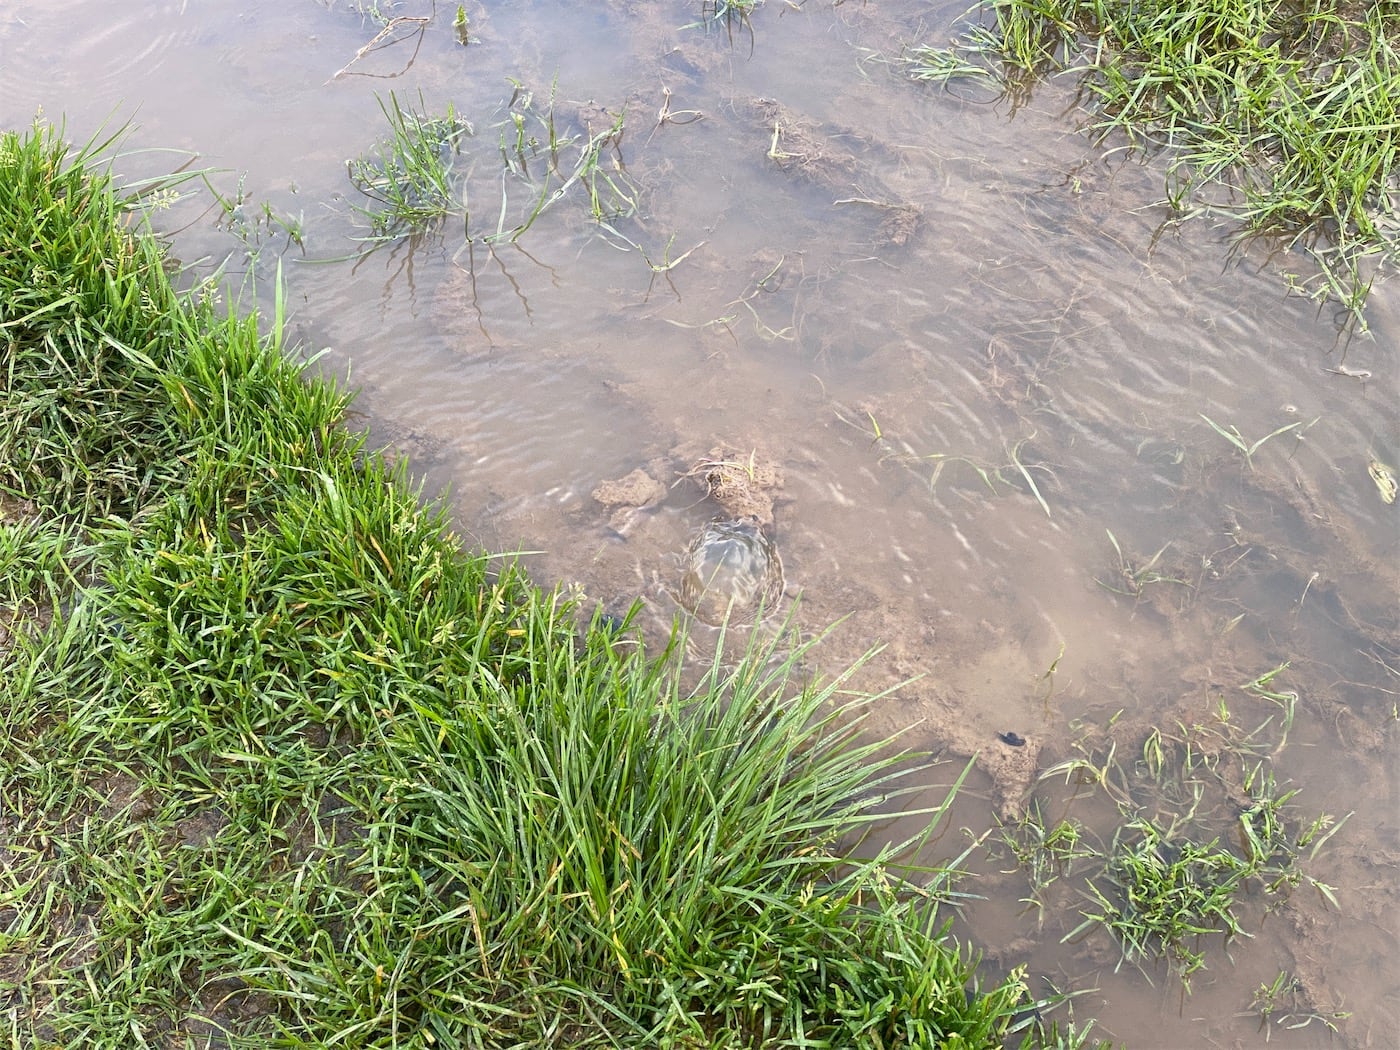 It’s not clear here, but this is water just bubbling up from the ground.